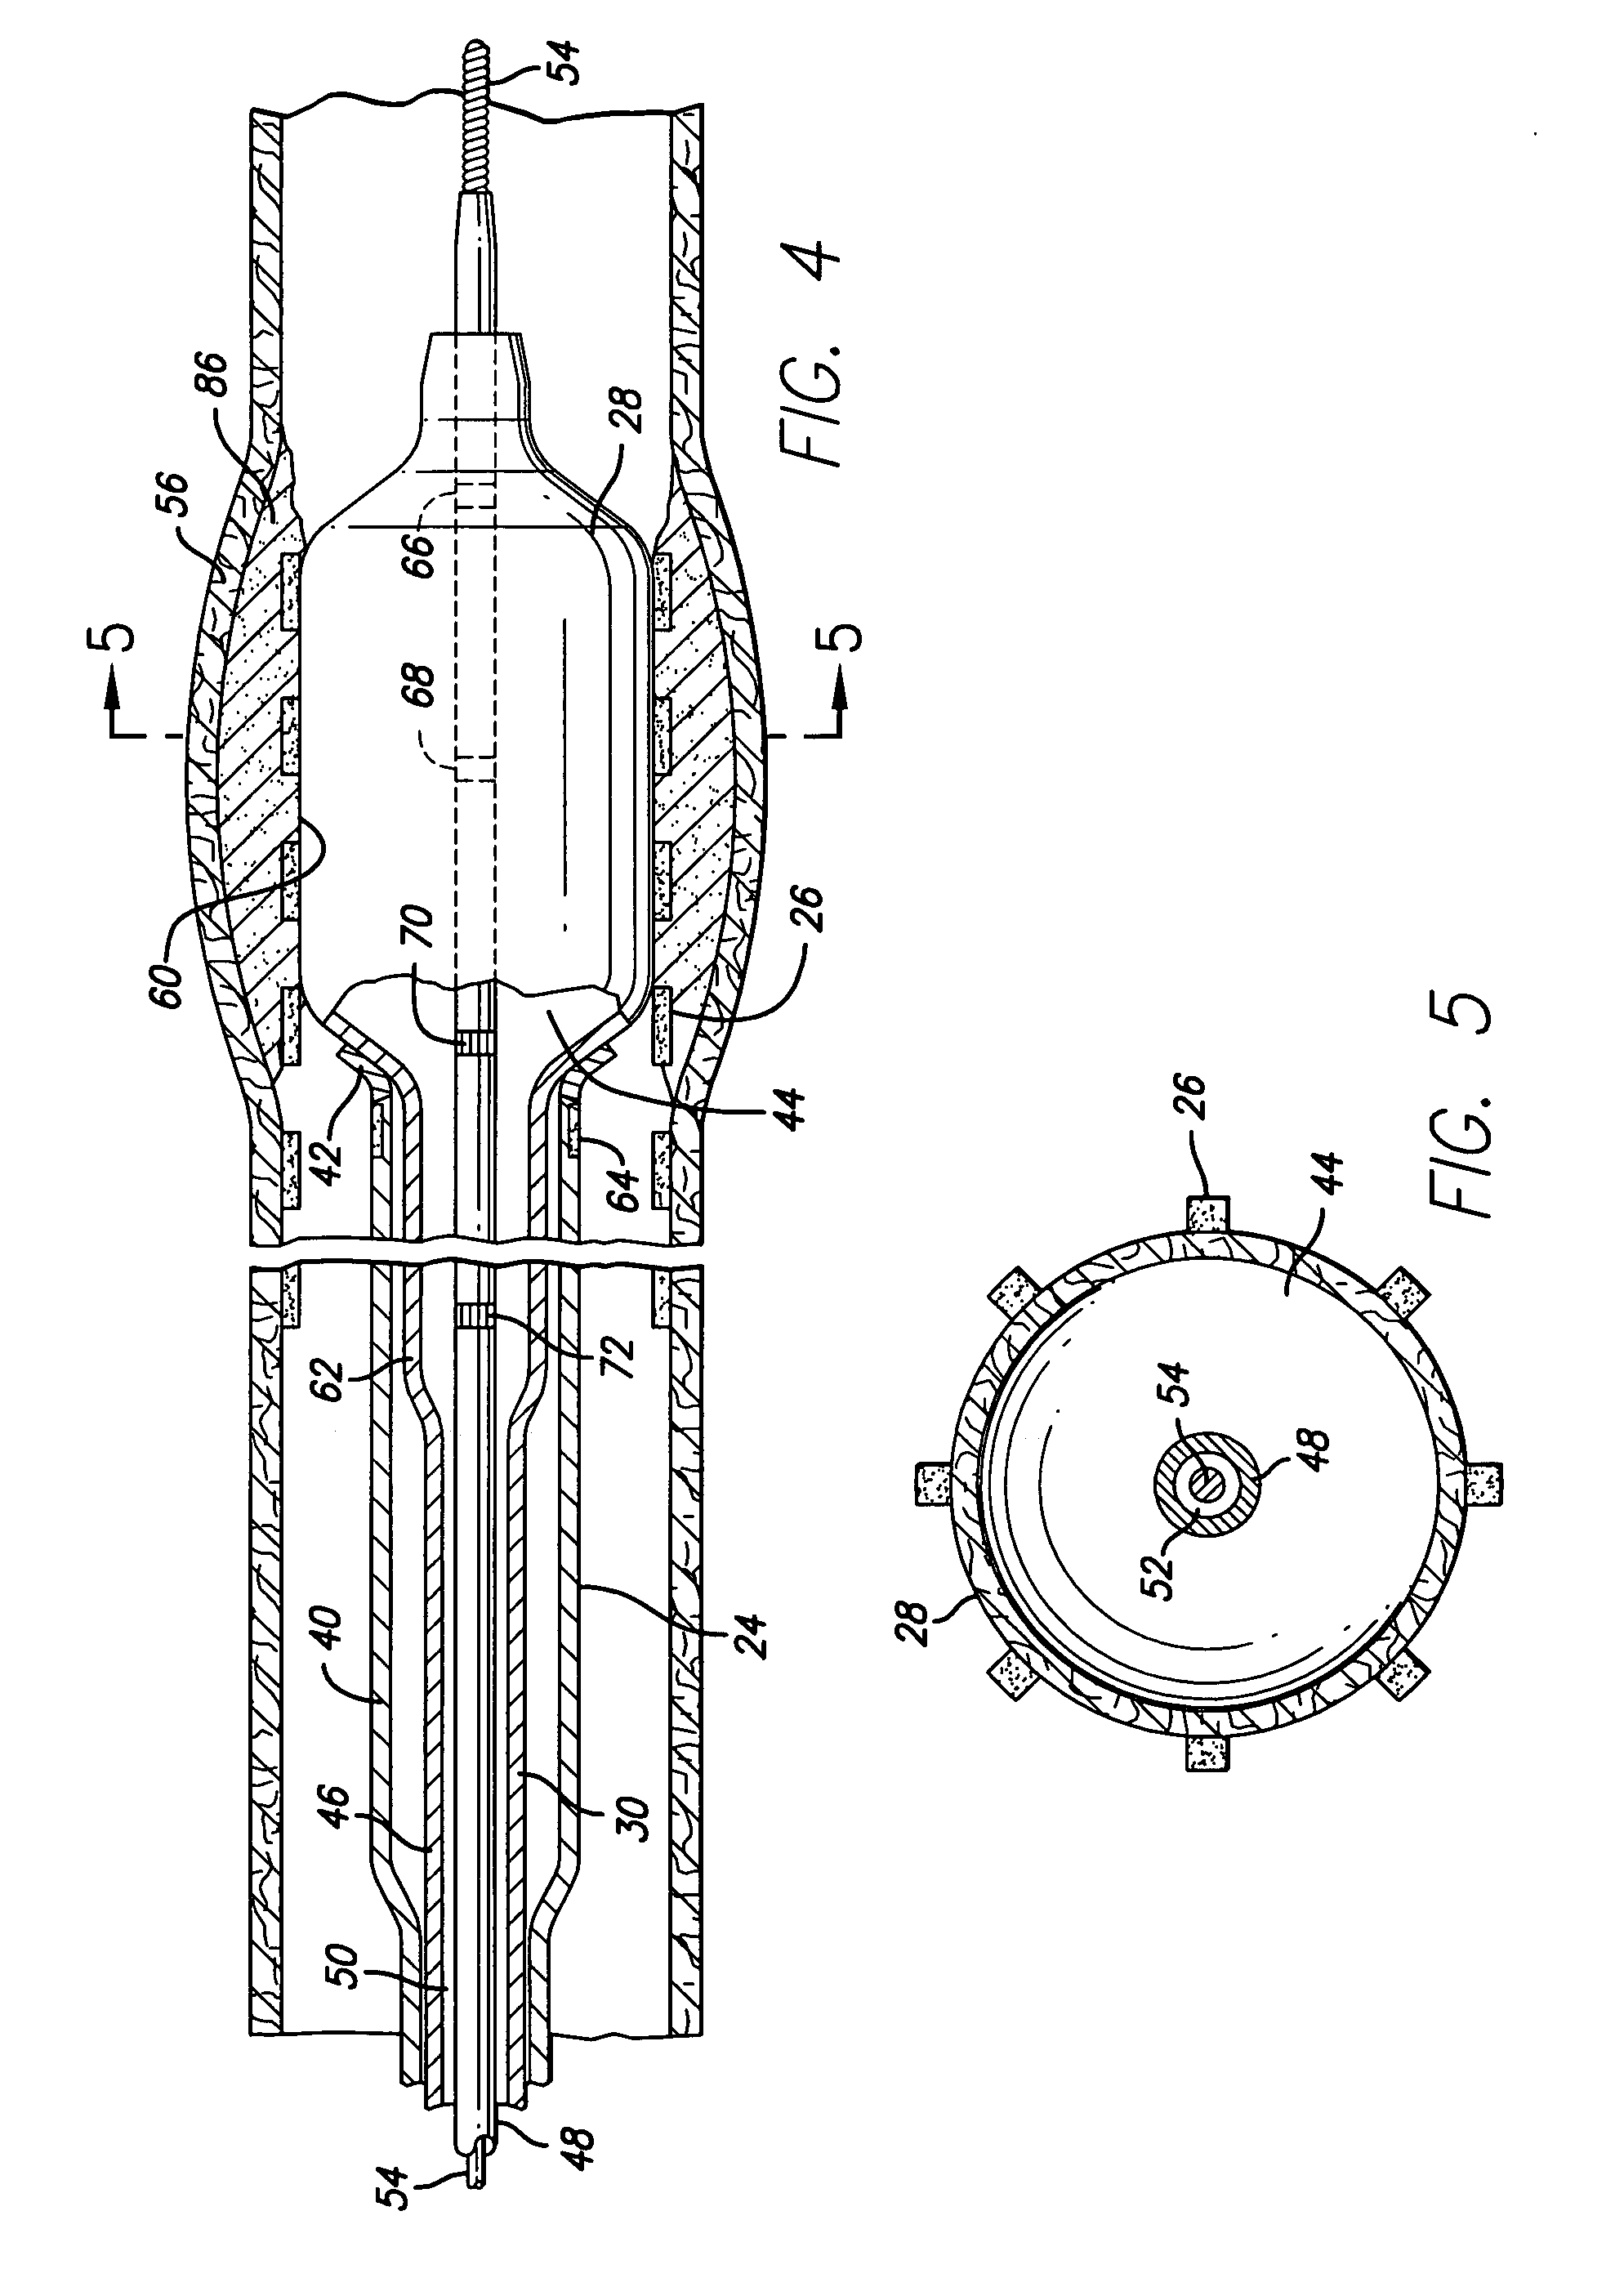 Stent delivery system with adjustable length balloon